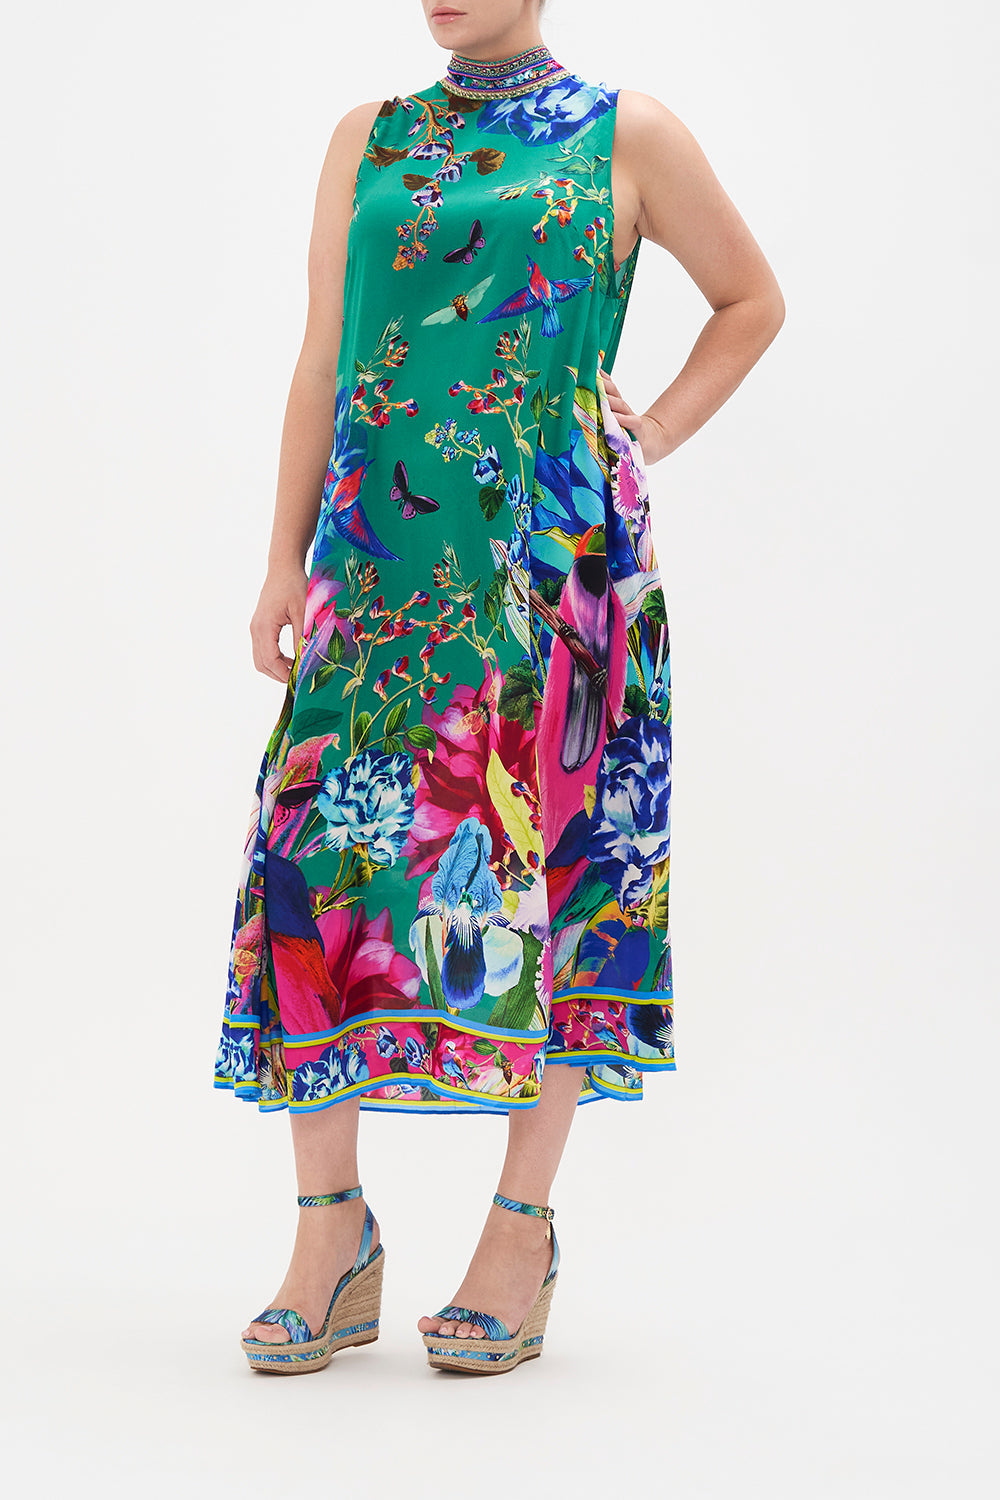 HIGH NECK DRESS WITH BACK NECK TIE RUN FROM PARADISE